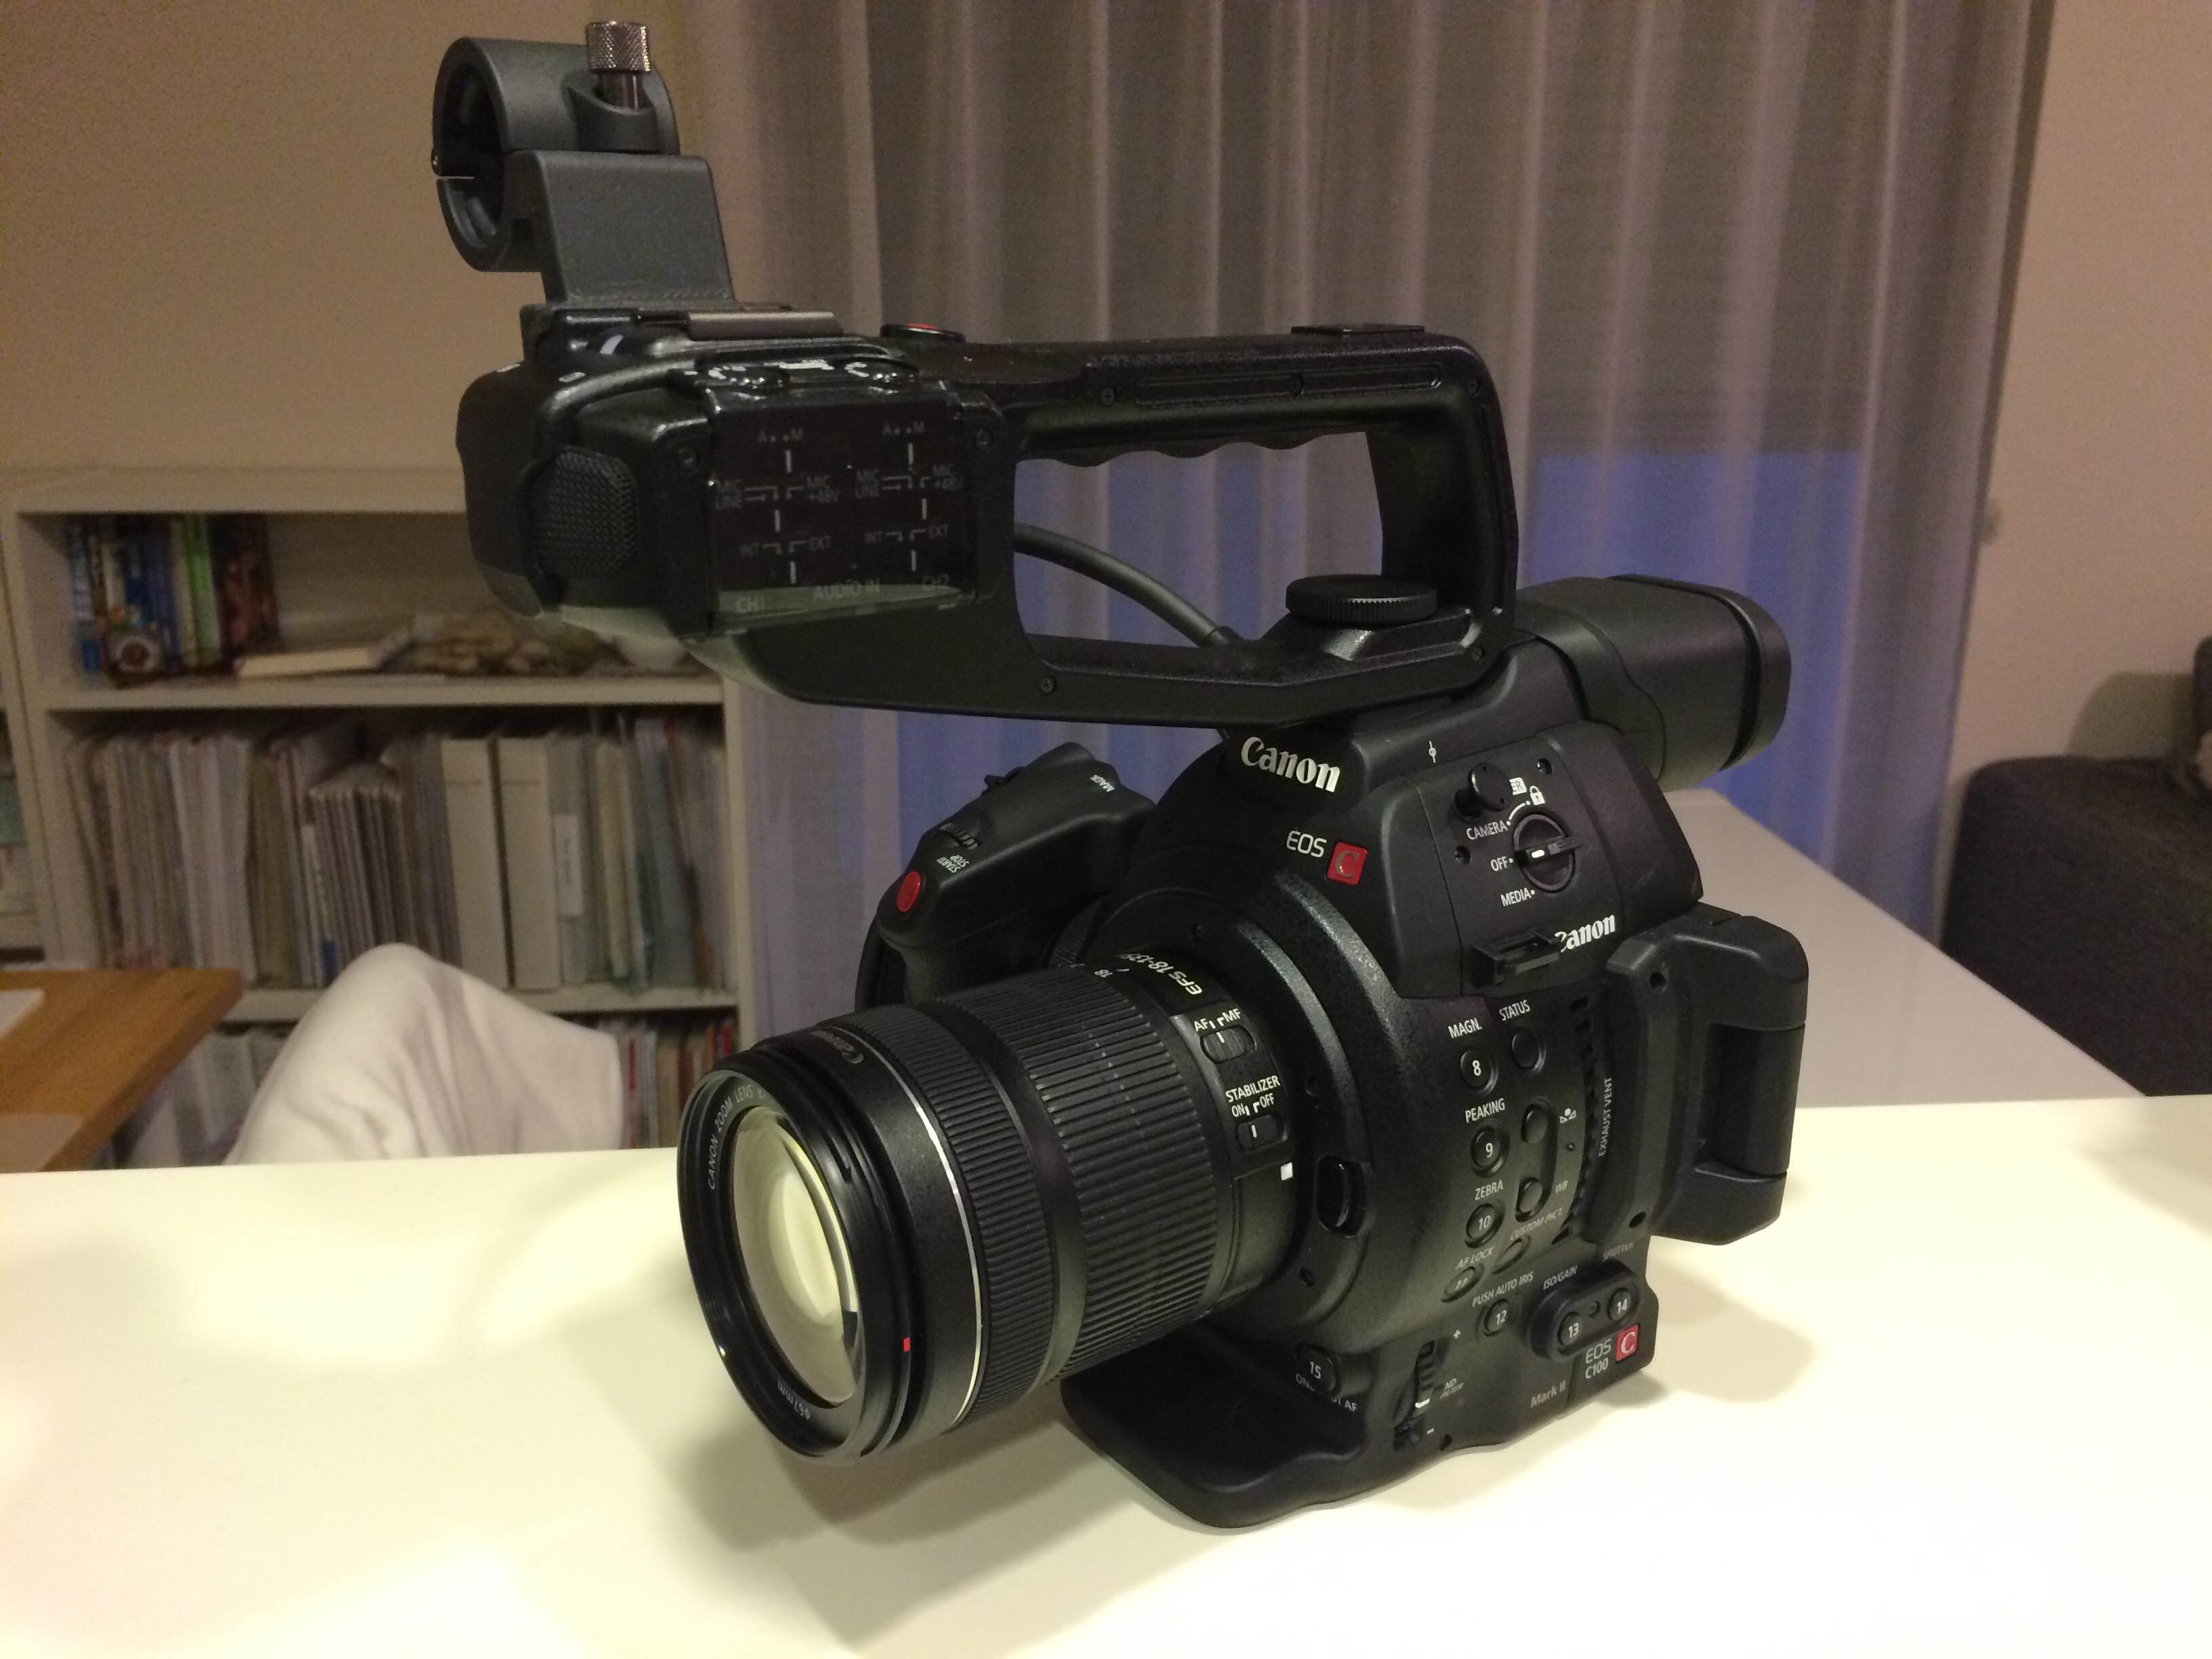 The C100 Mark - I actually it -